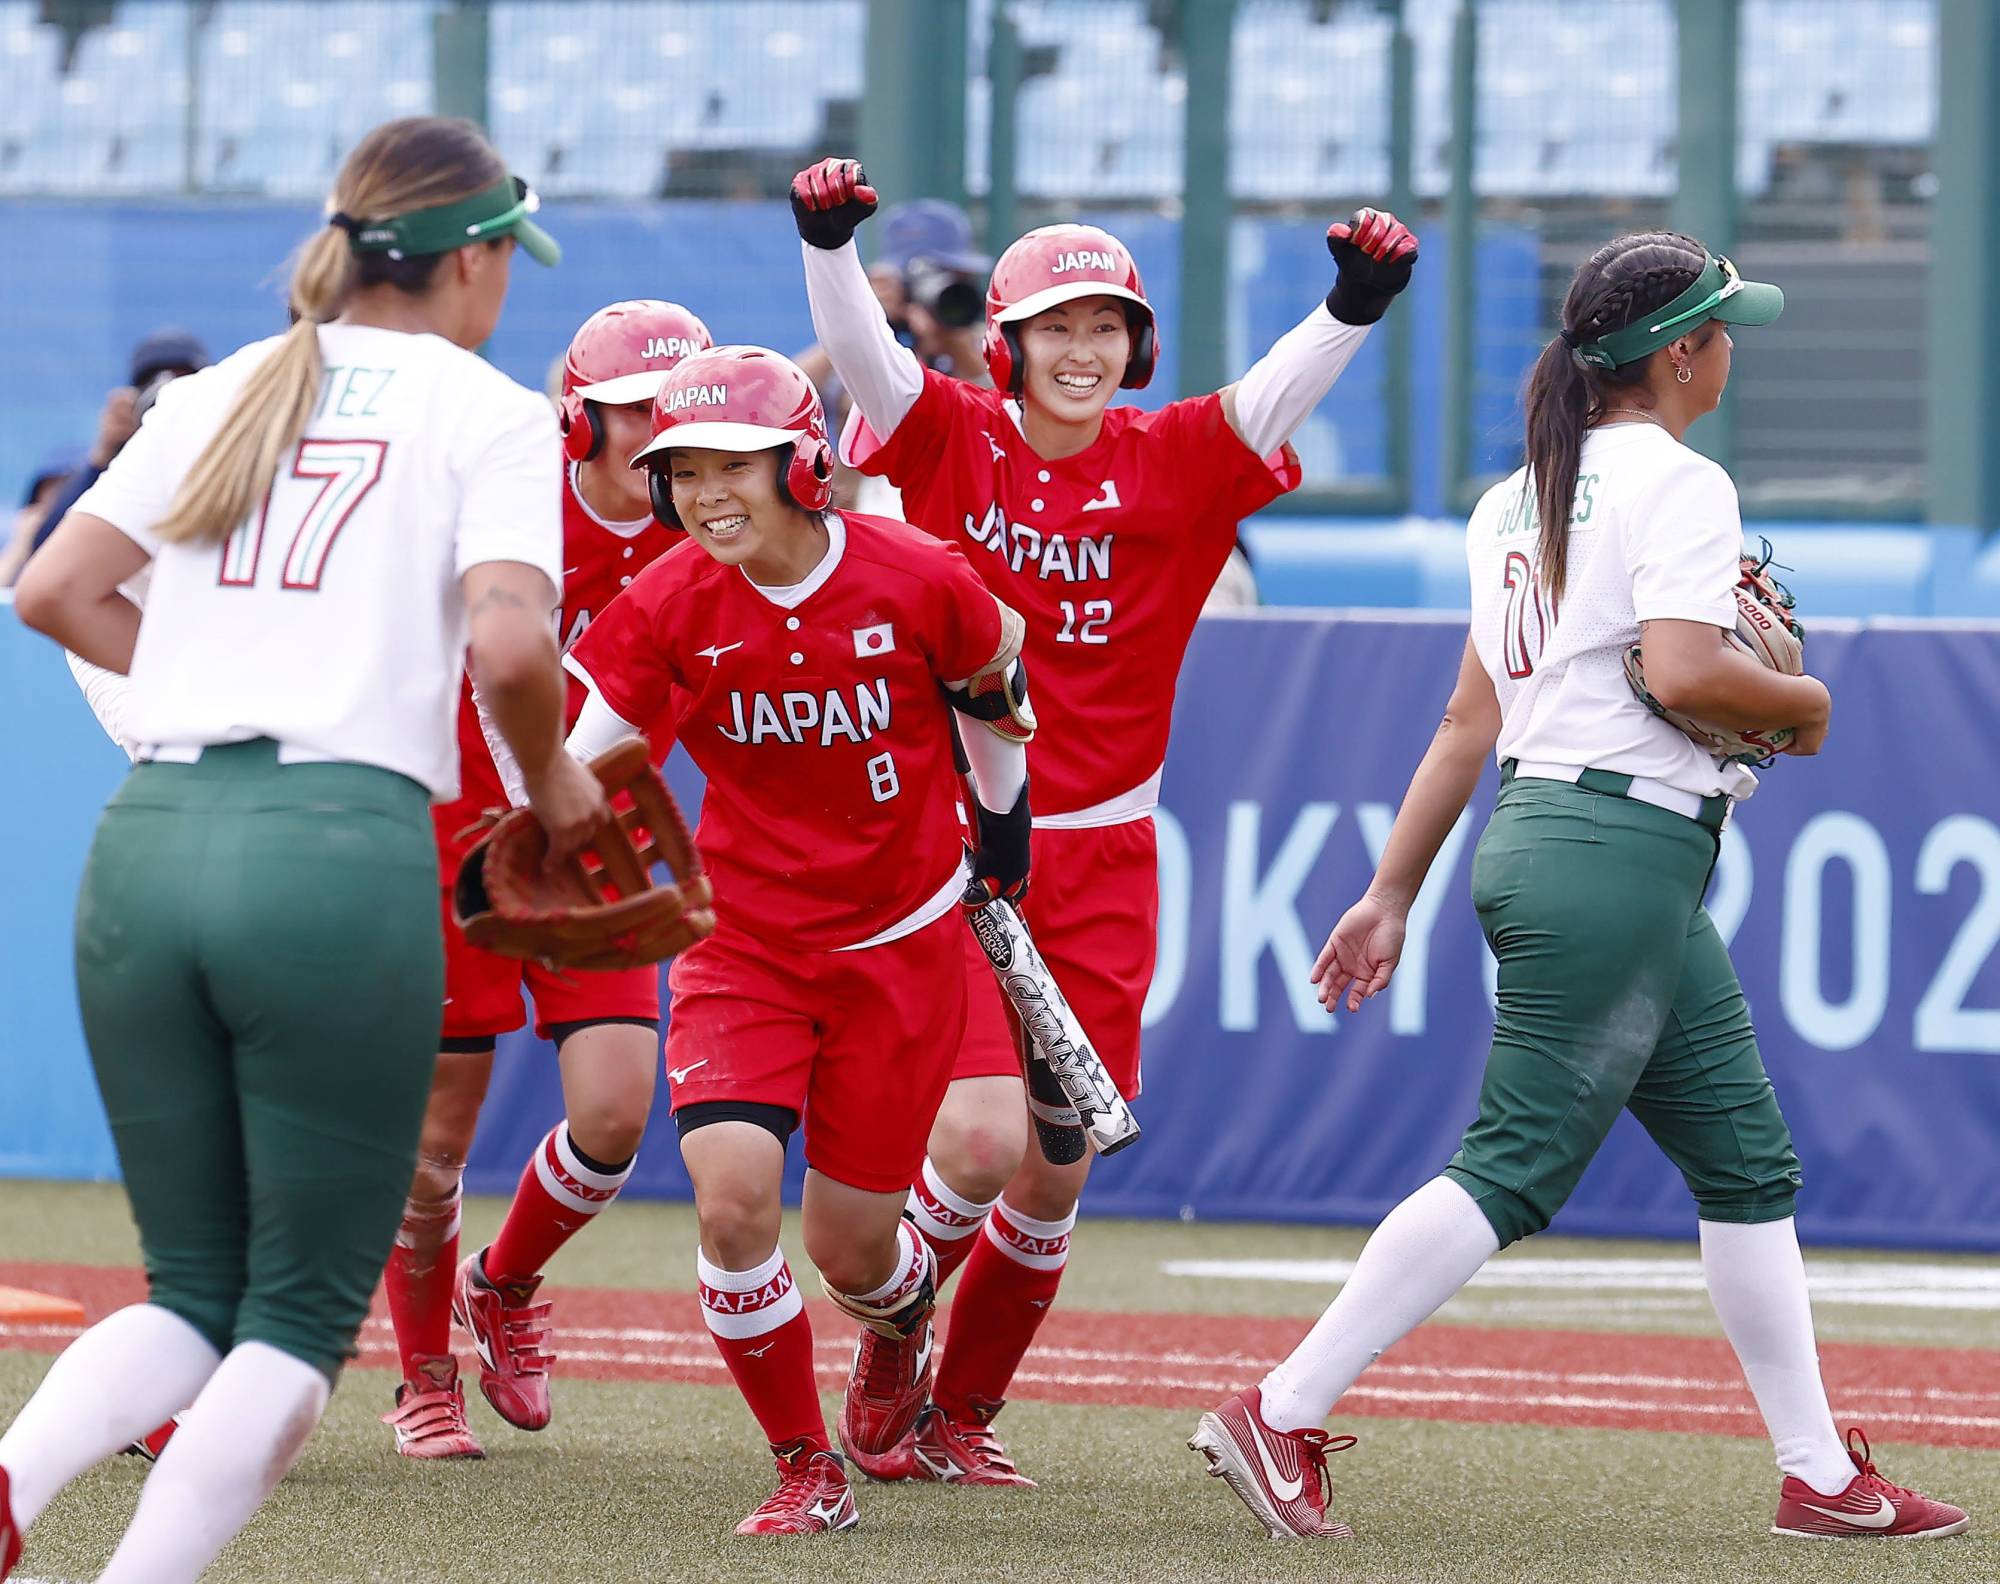 Miu Goto Saves The Day As Japans Softball Team Earns Dramatic Win Over